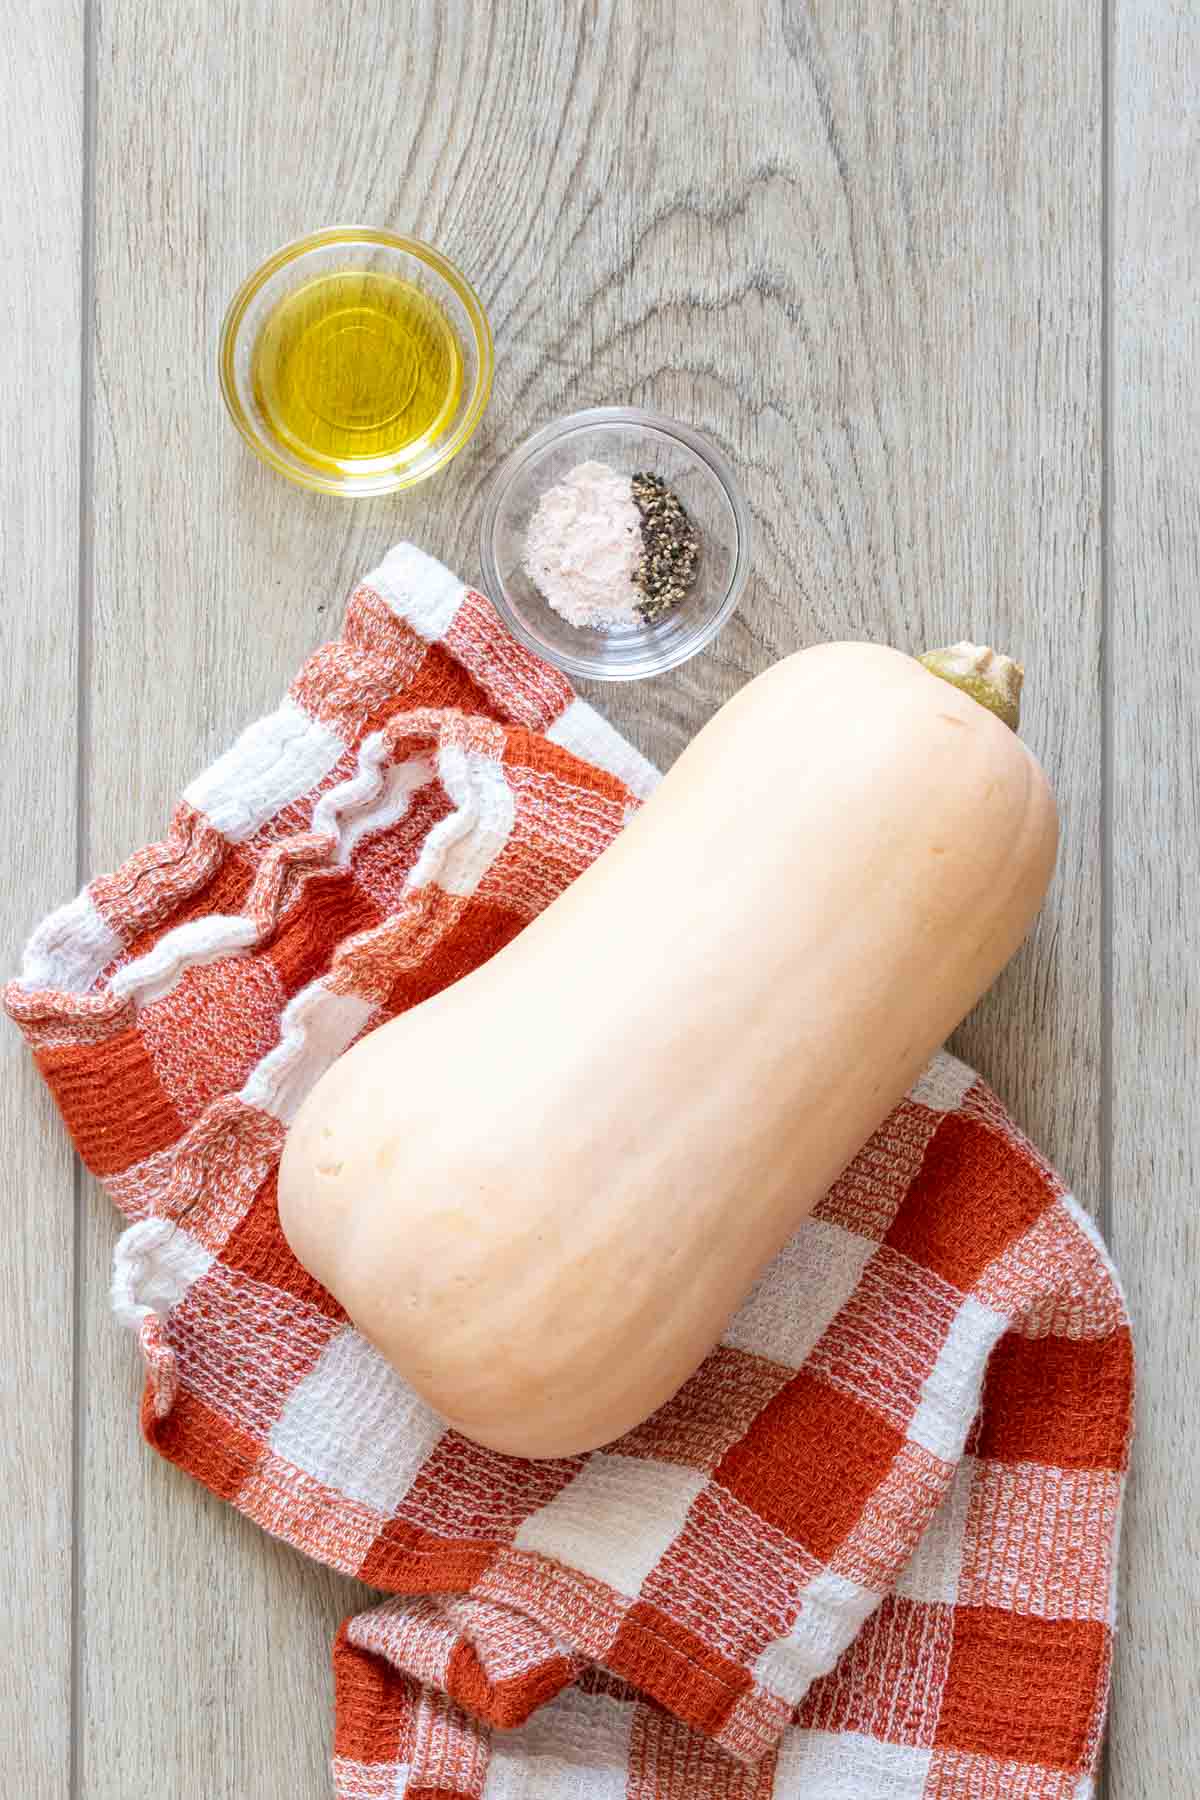 A butternut squash next to two glass bowls of oil and salt and pepper.